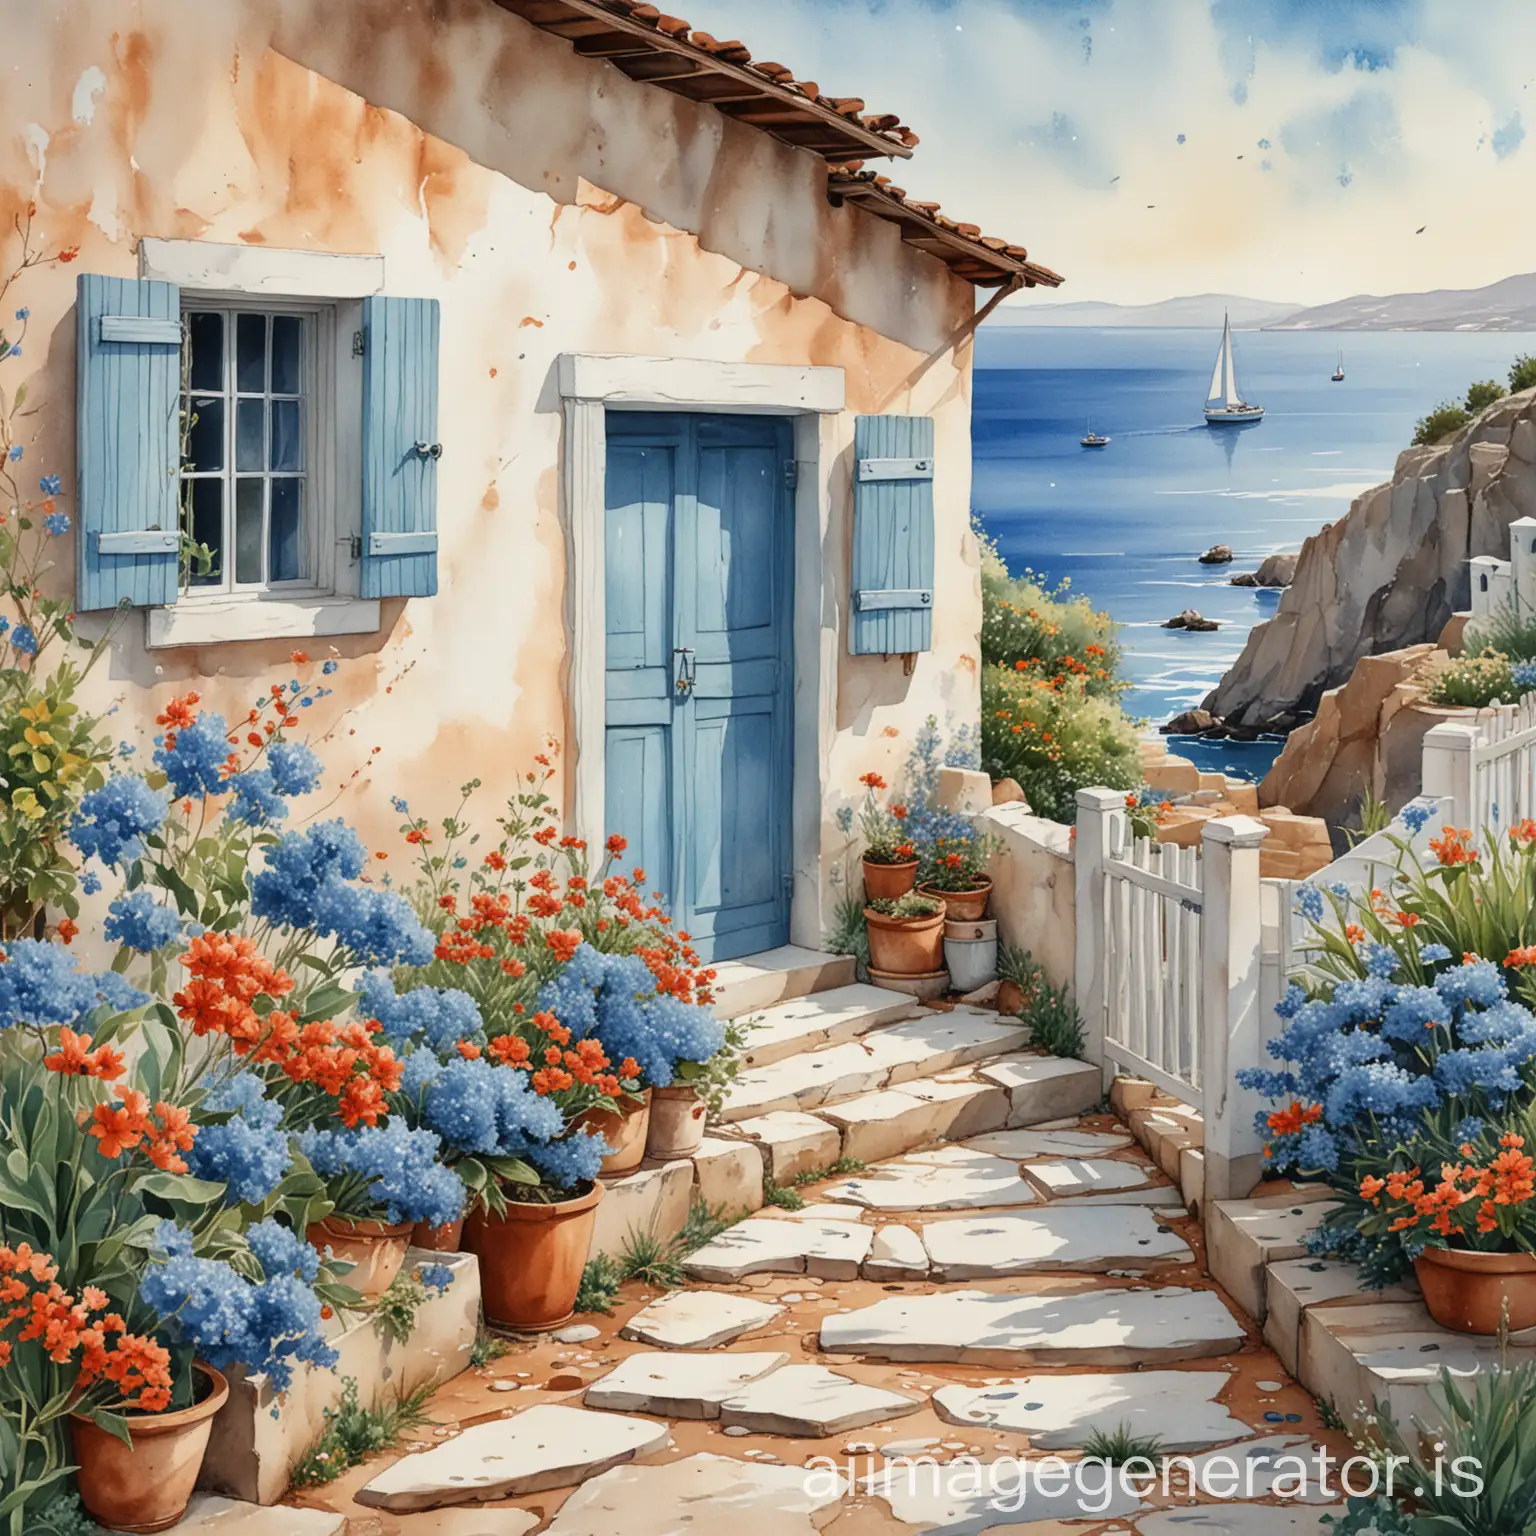 A captivating watercolor illustration of a quaint Greek house by the coast, showcasing the timeless white and blue color scheme. The house is adorned with vibrant flowers, rustic wooden shutters, and terra cotta pots, adding to its charm. In the foreground, a worn stone path with small pebbles leads to the entrance, inviting you to explore. In the distance, the sea shimmers under the warm hues of the sky, with a small sailboat gently navigating the gentle waves. The overall atmosphere of the illustration is serene and tranquil, evoking a sense of vacation and relaxation.